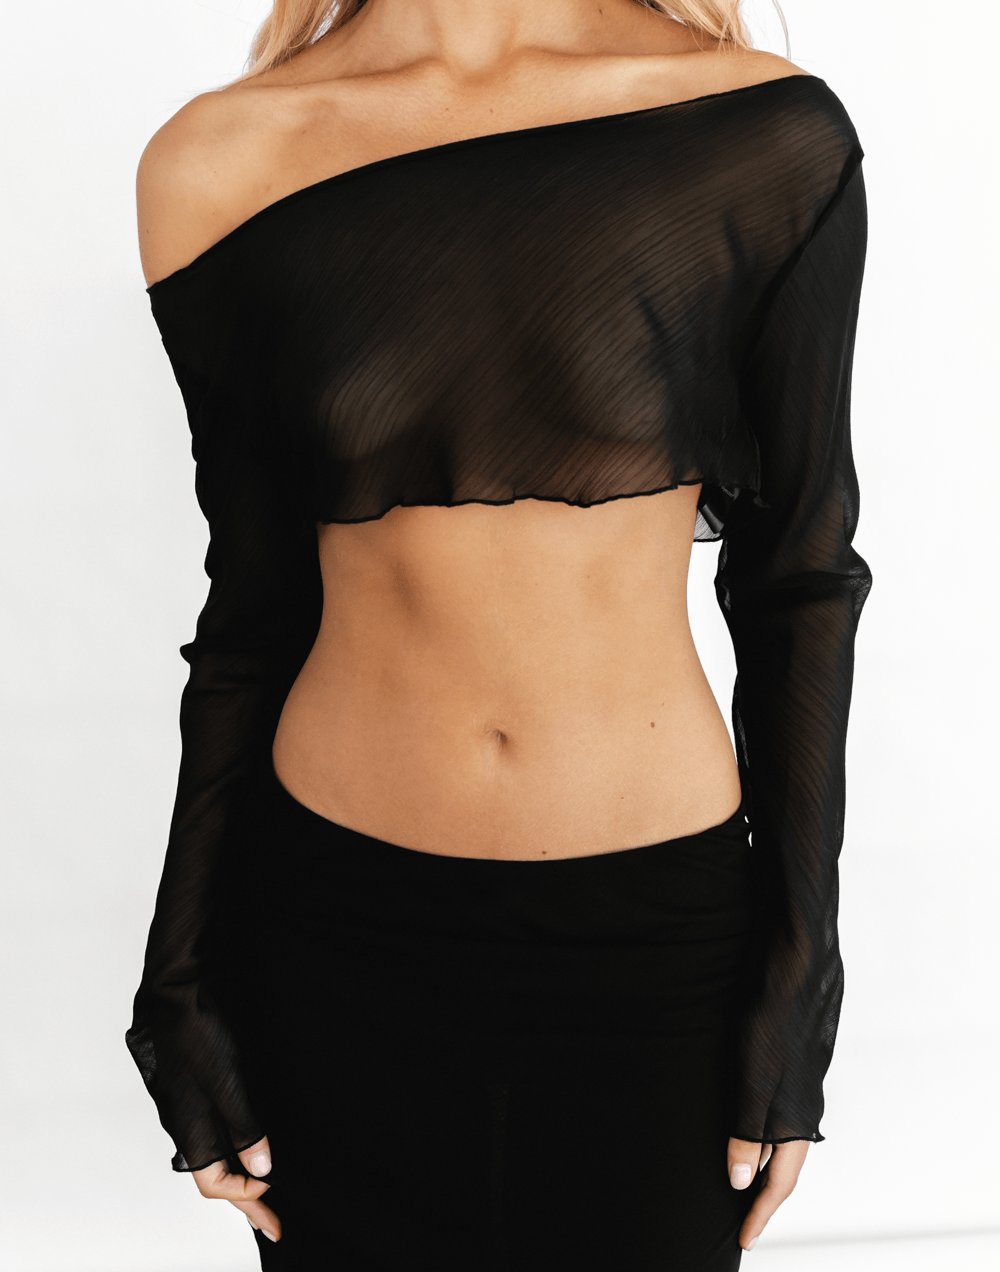 Devon Long Sleeve Top (Licorice) - By Lioness - Women's Top - Charcoal Clothing